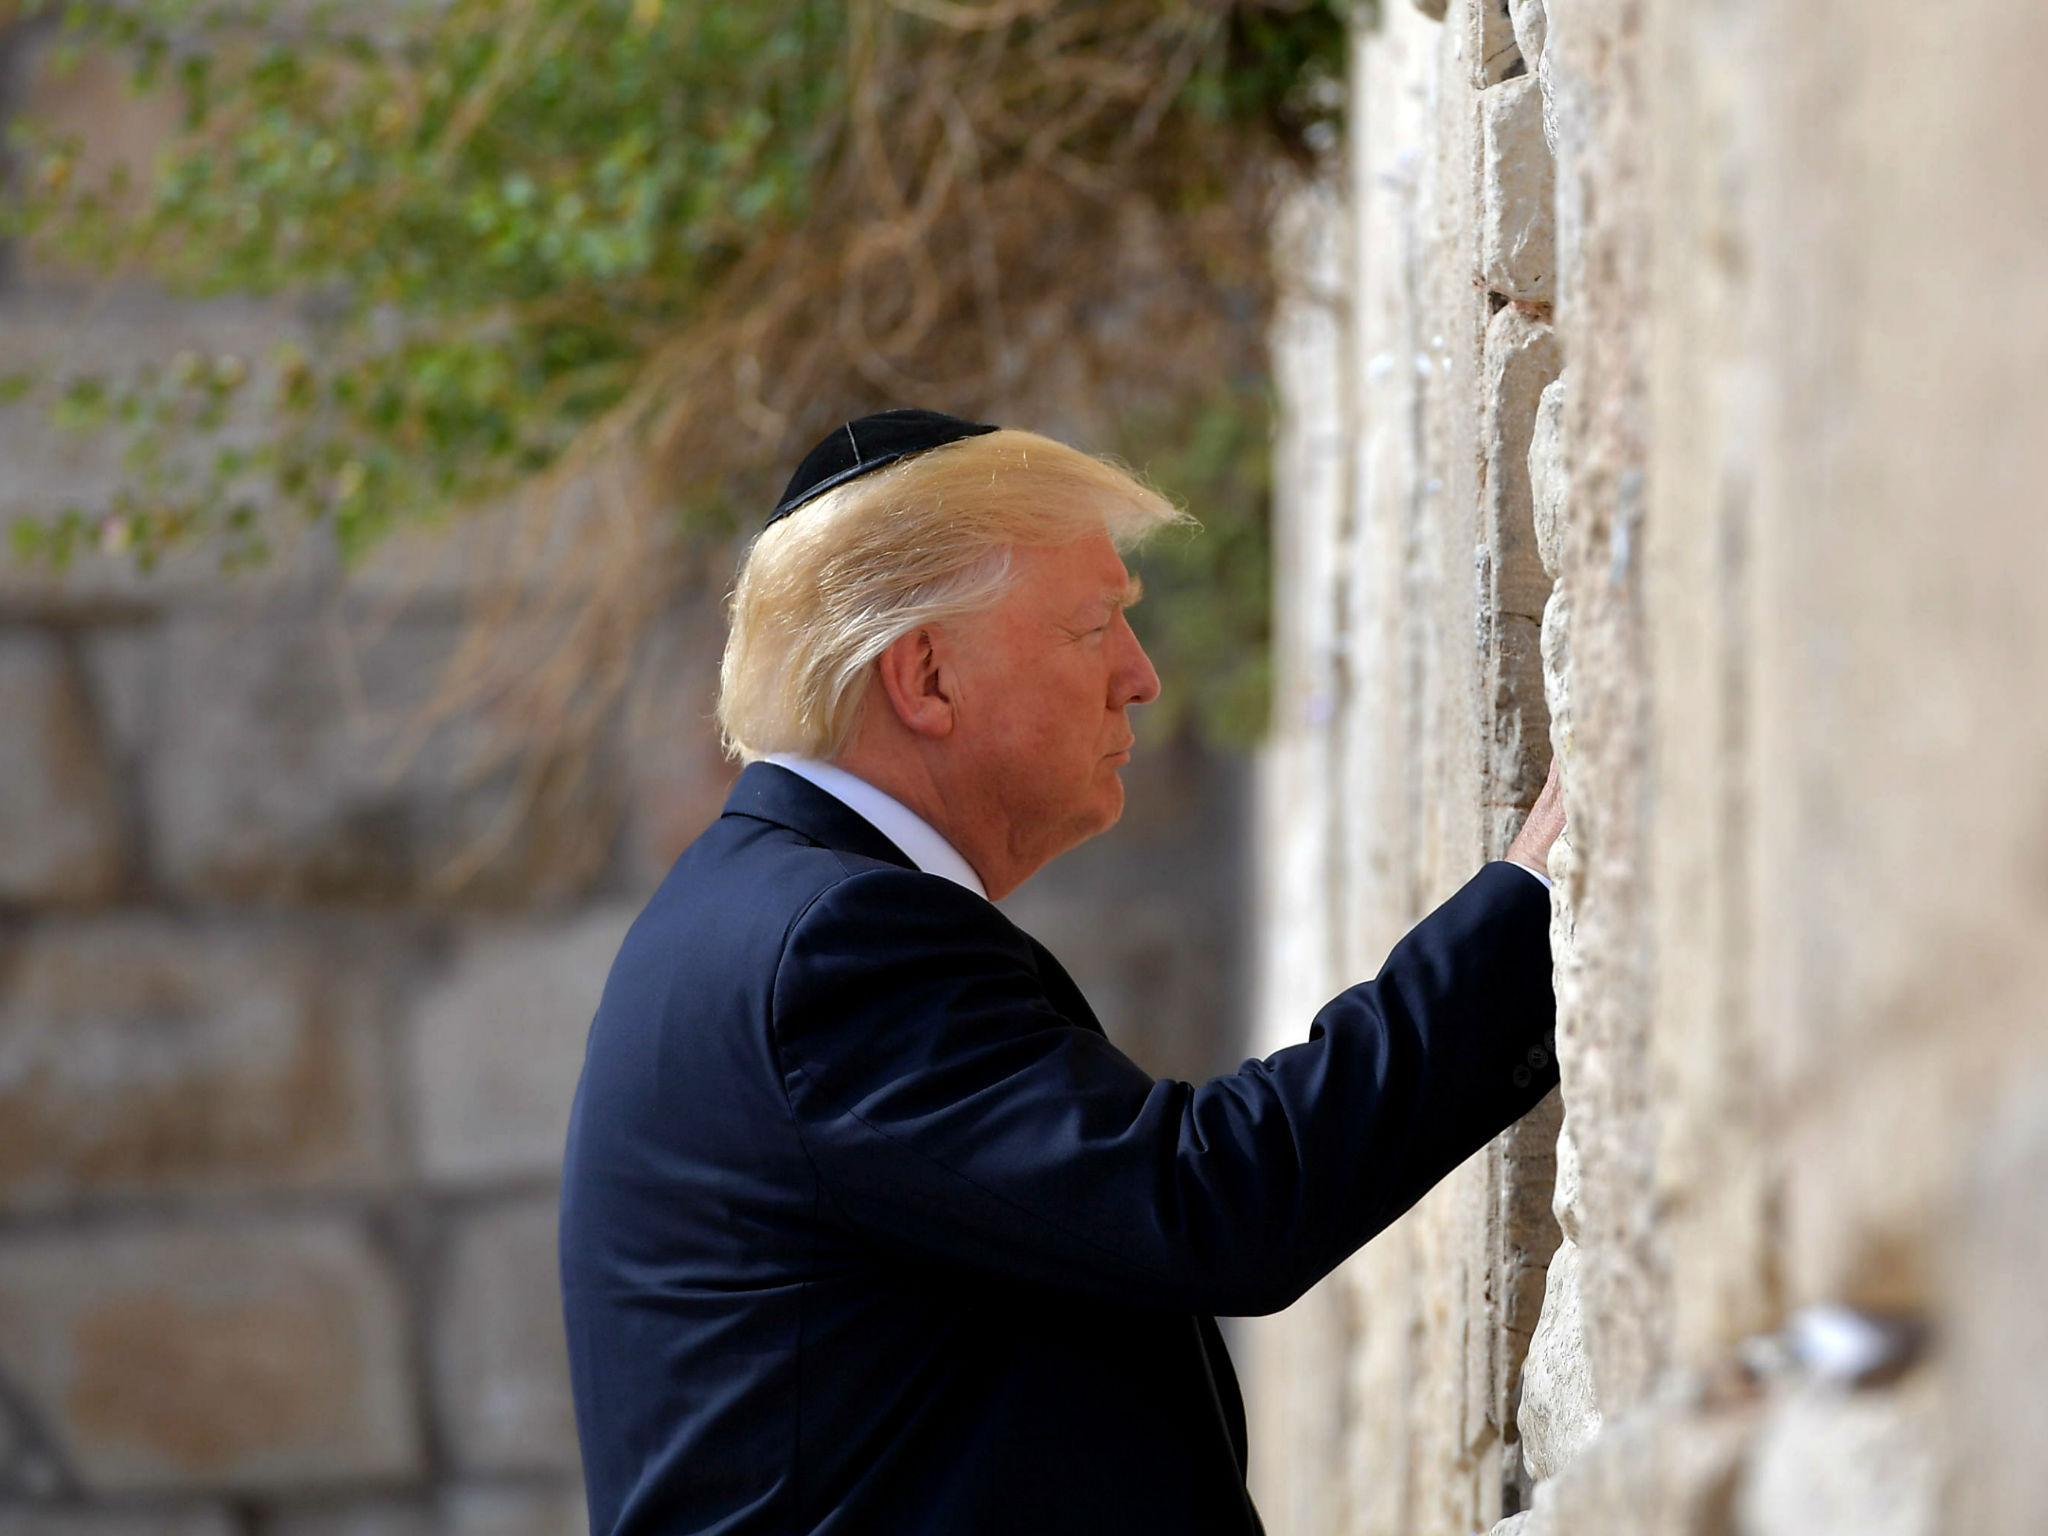 Trump visits the Western Wall, the holiest site where Jews can pray, in Jerusalem's Old City